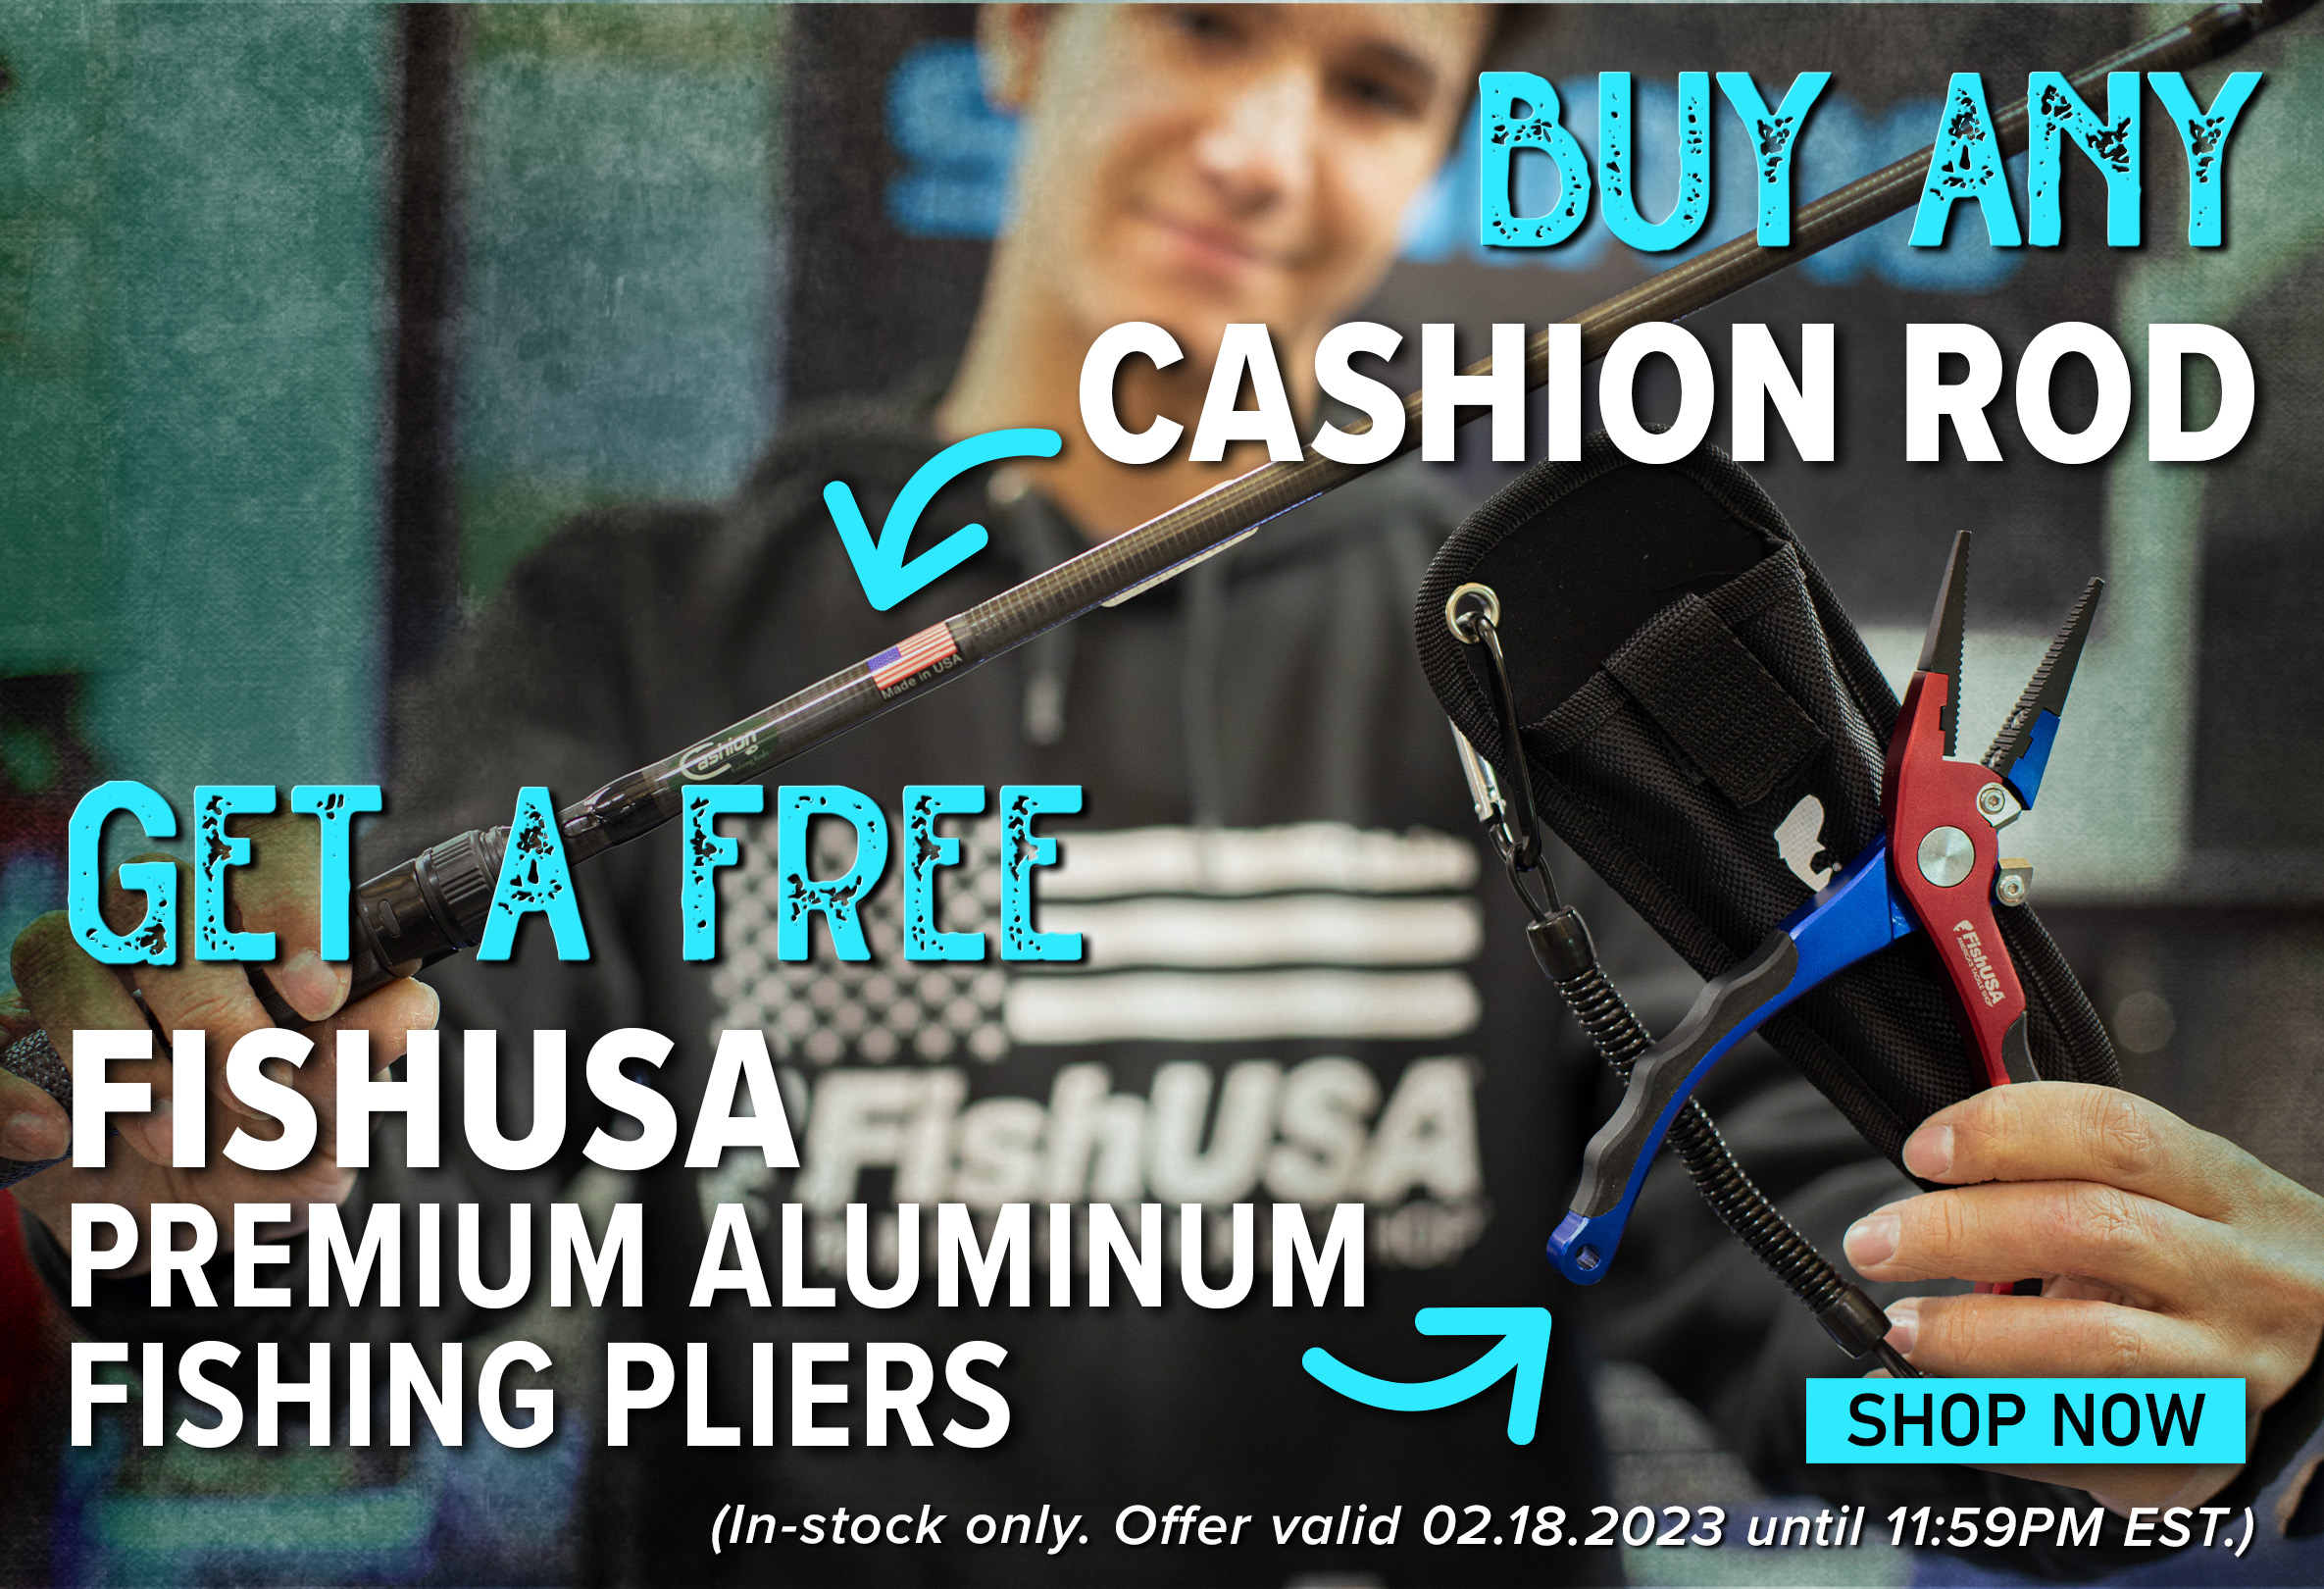 Buy Any Cashion Rod Get a Free Fishusa Premium ALuminum Fishing Pliers Shop Now (In-stock only. Offer valid 02.18.2023 until 11:59PM EST.)  FISHING 1 SHOP NOW In-stock only. Offer valid 02.18. 2023 untll 11 59PM EST 